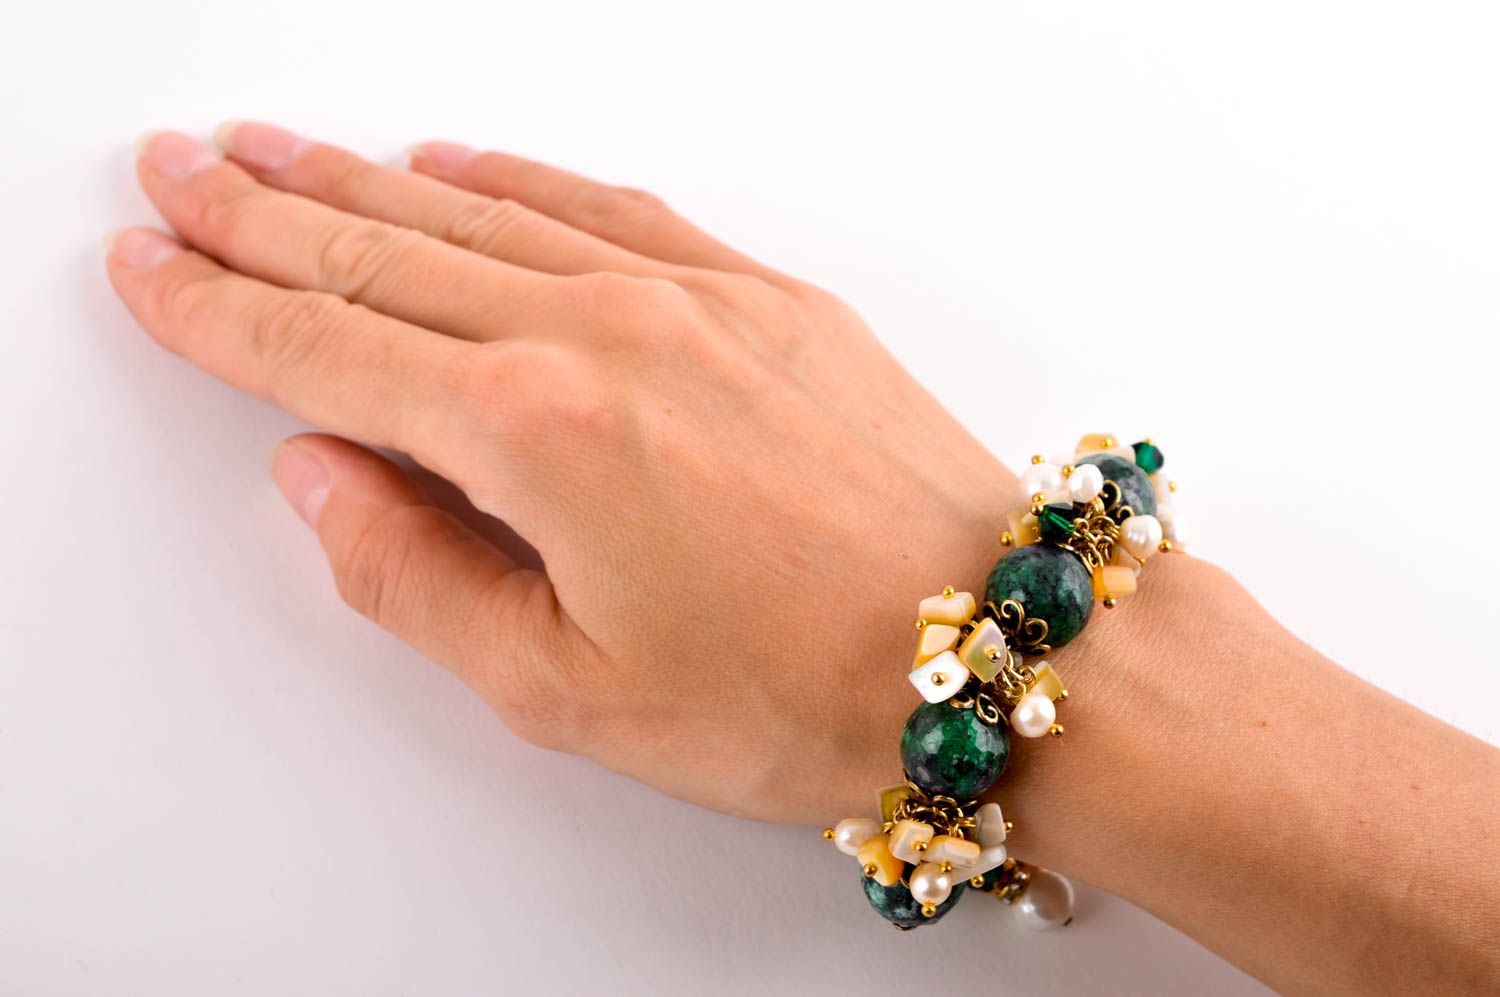 Designer bracelet with natural stones handmade accessories fashion jewelry photo 5